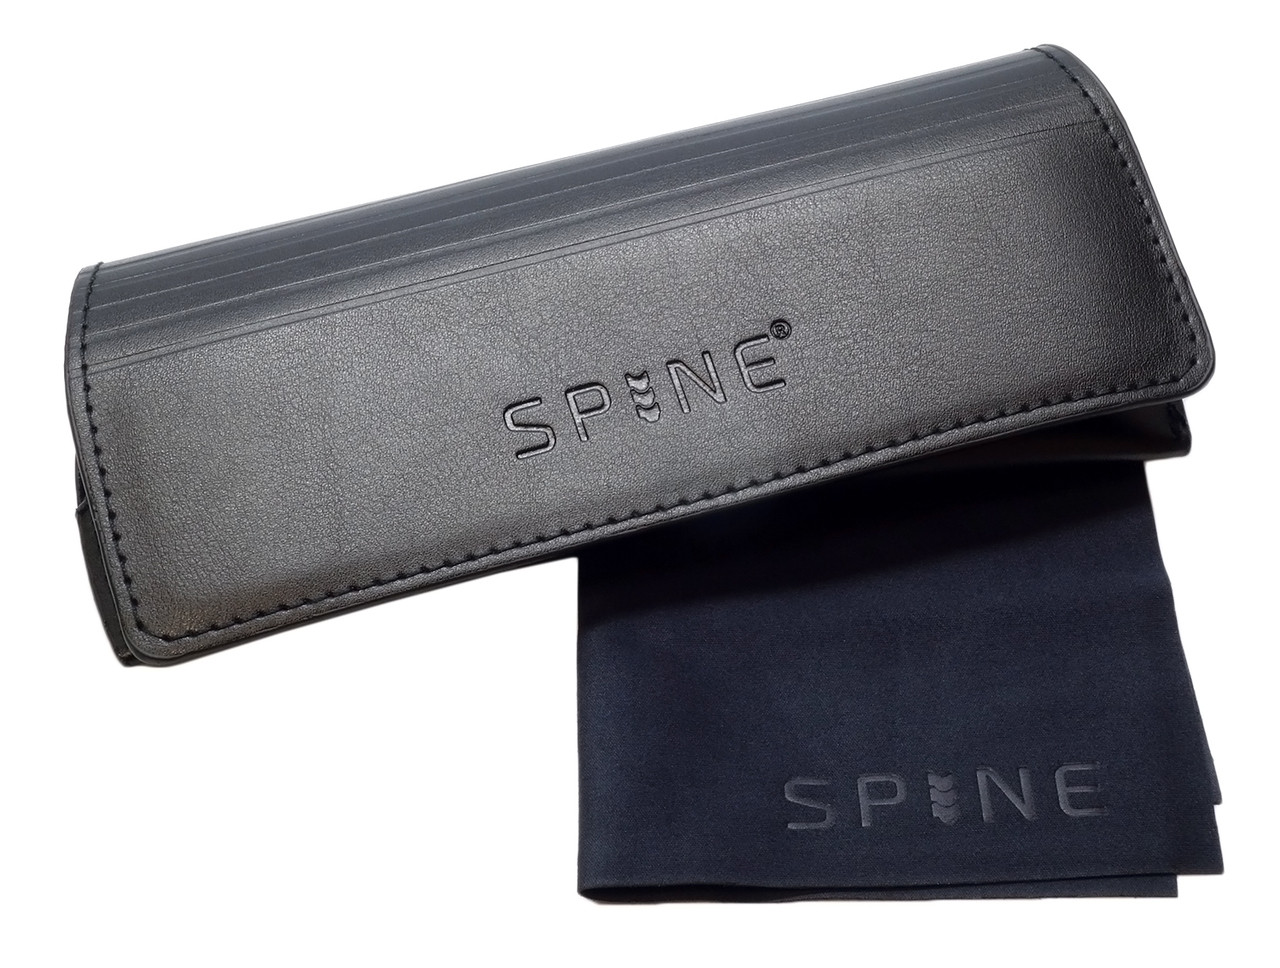 Included Spine Optics Carryng Case